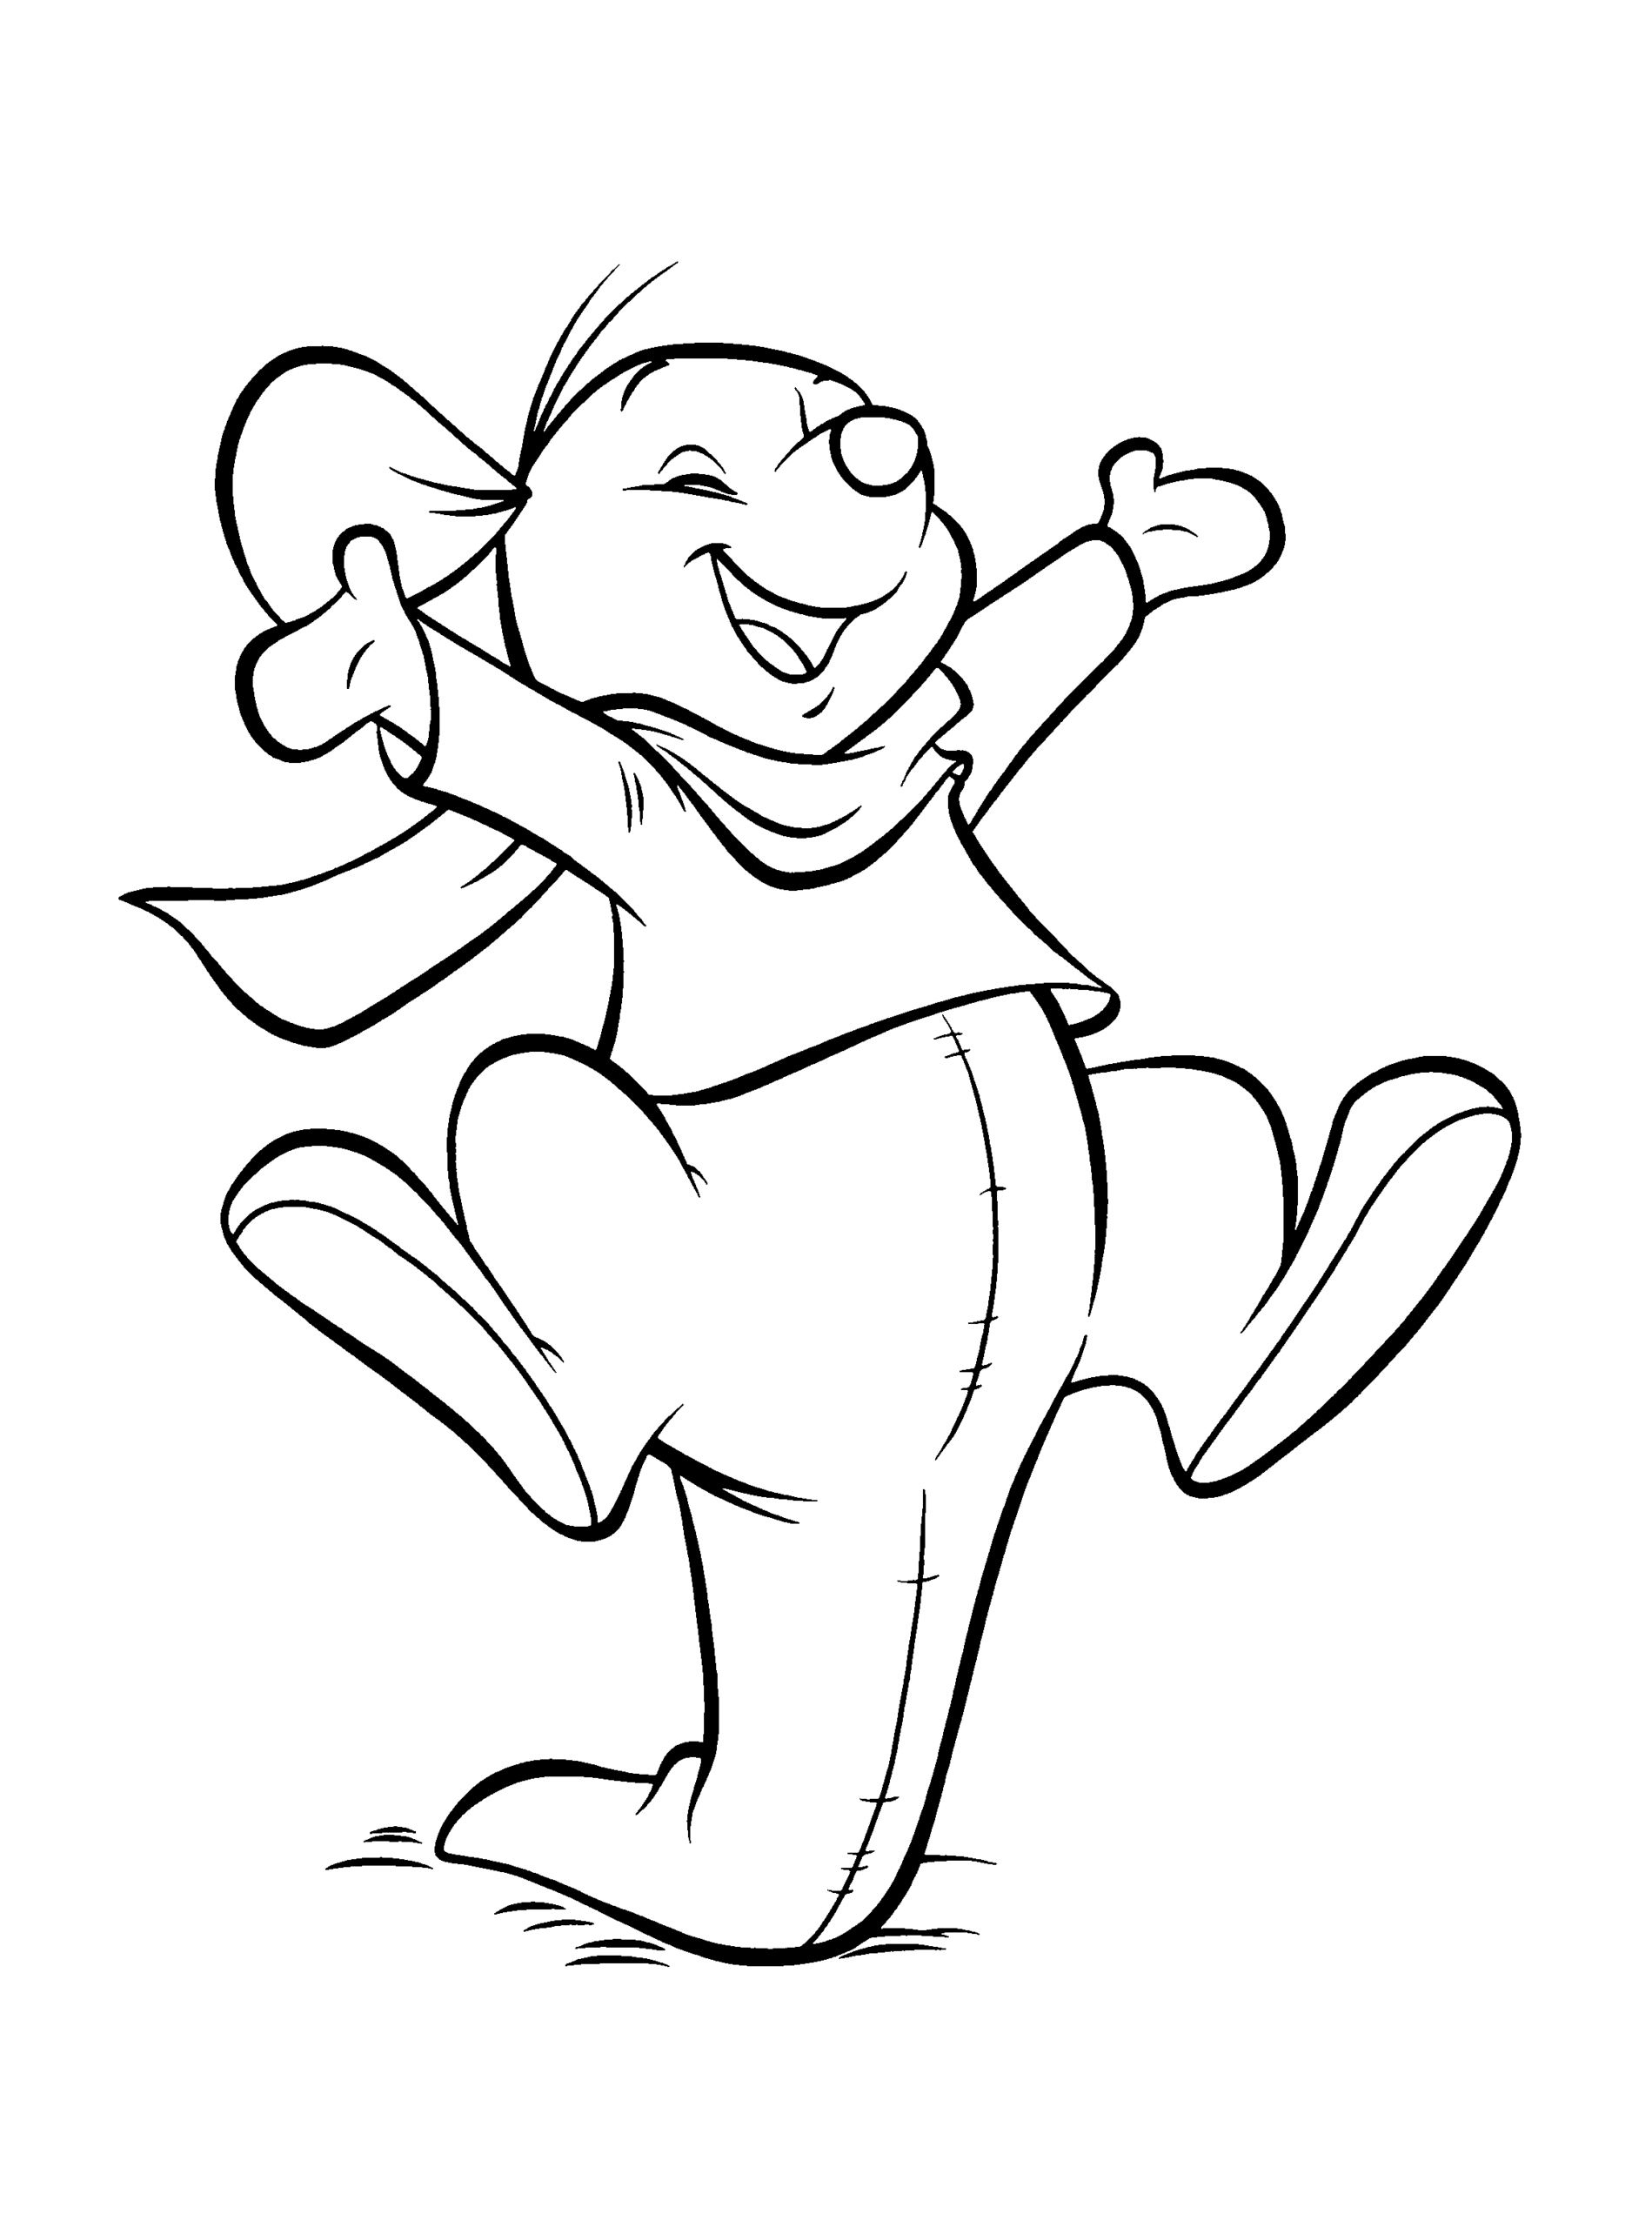 Winnie the Pooh Coloring Pages Cartoons winnie the pooh 11 Printable 2020 7089 Coloring4free